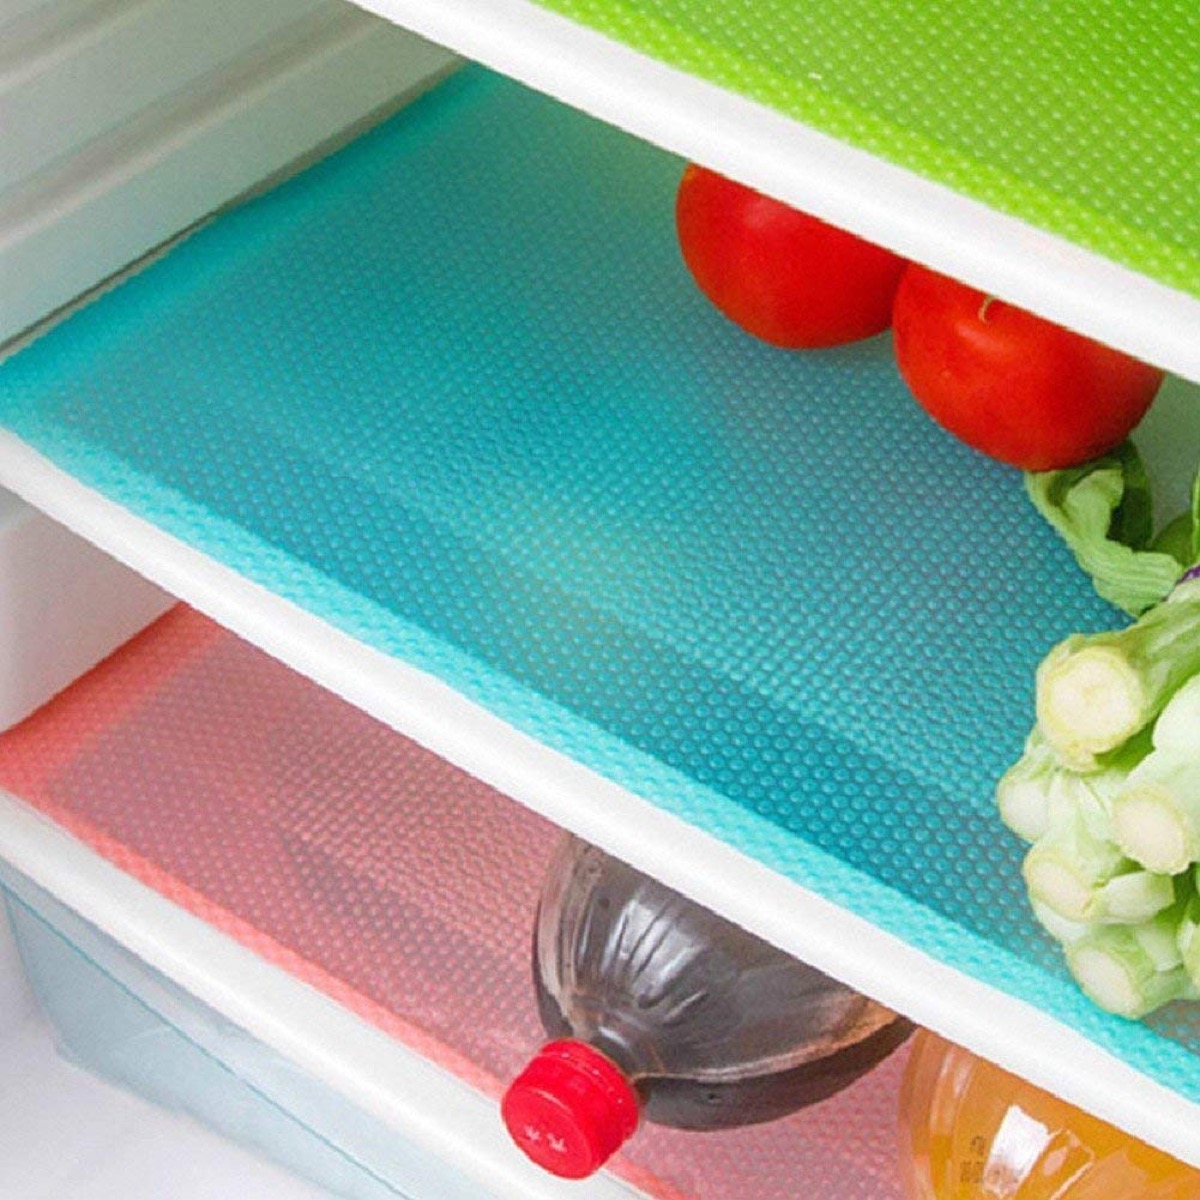 fridge with three shelves lined in bright colors, essential home supplies